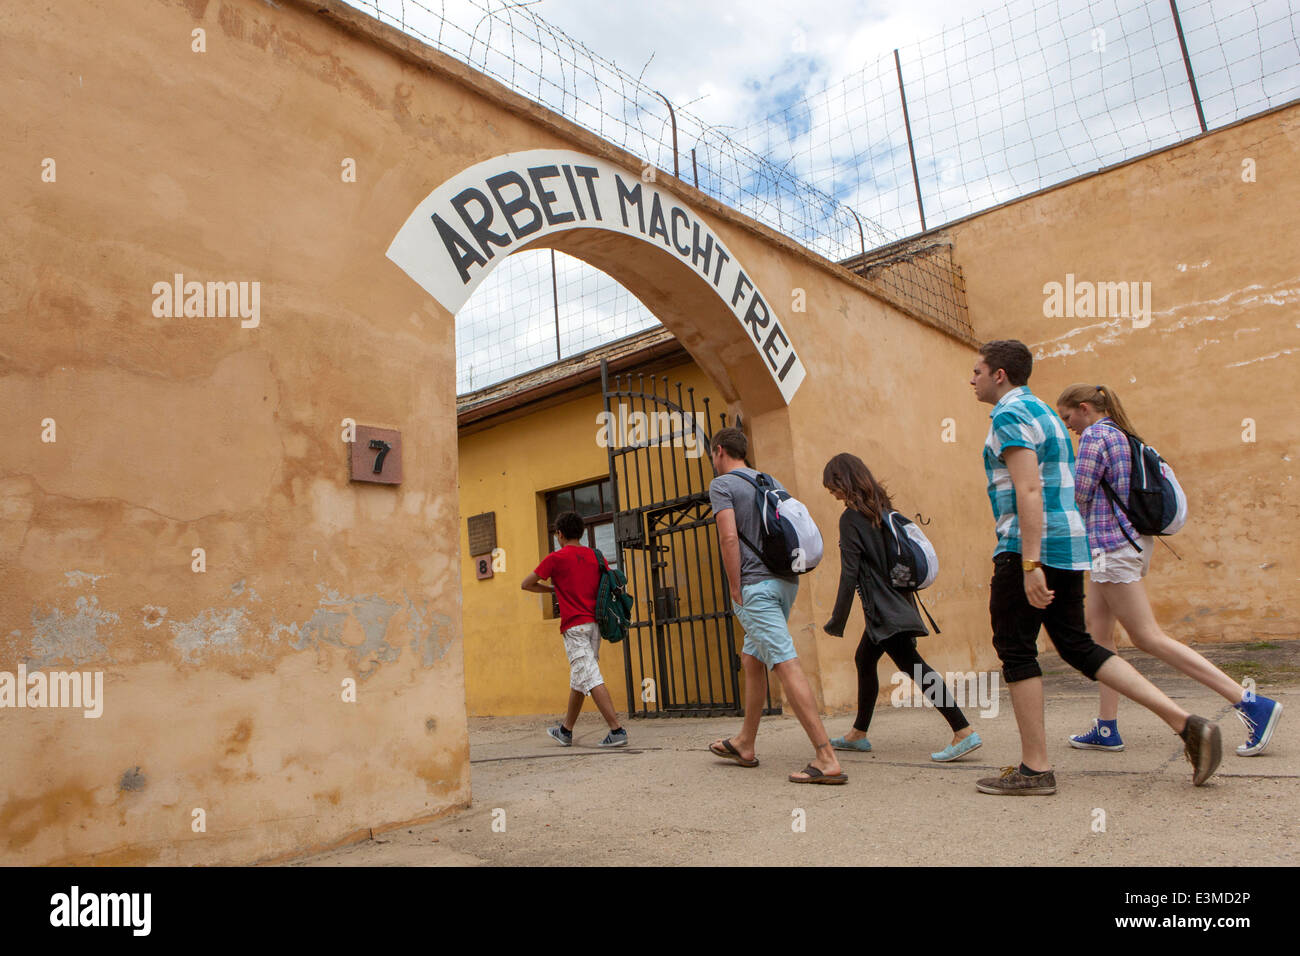 Arbeit Macht Frei, the inscription above the gate of the Small Fortress Terezin, Czech Republic Stock Photo